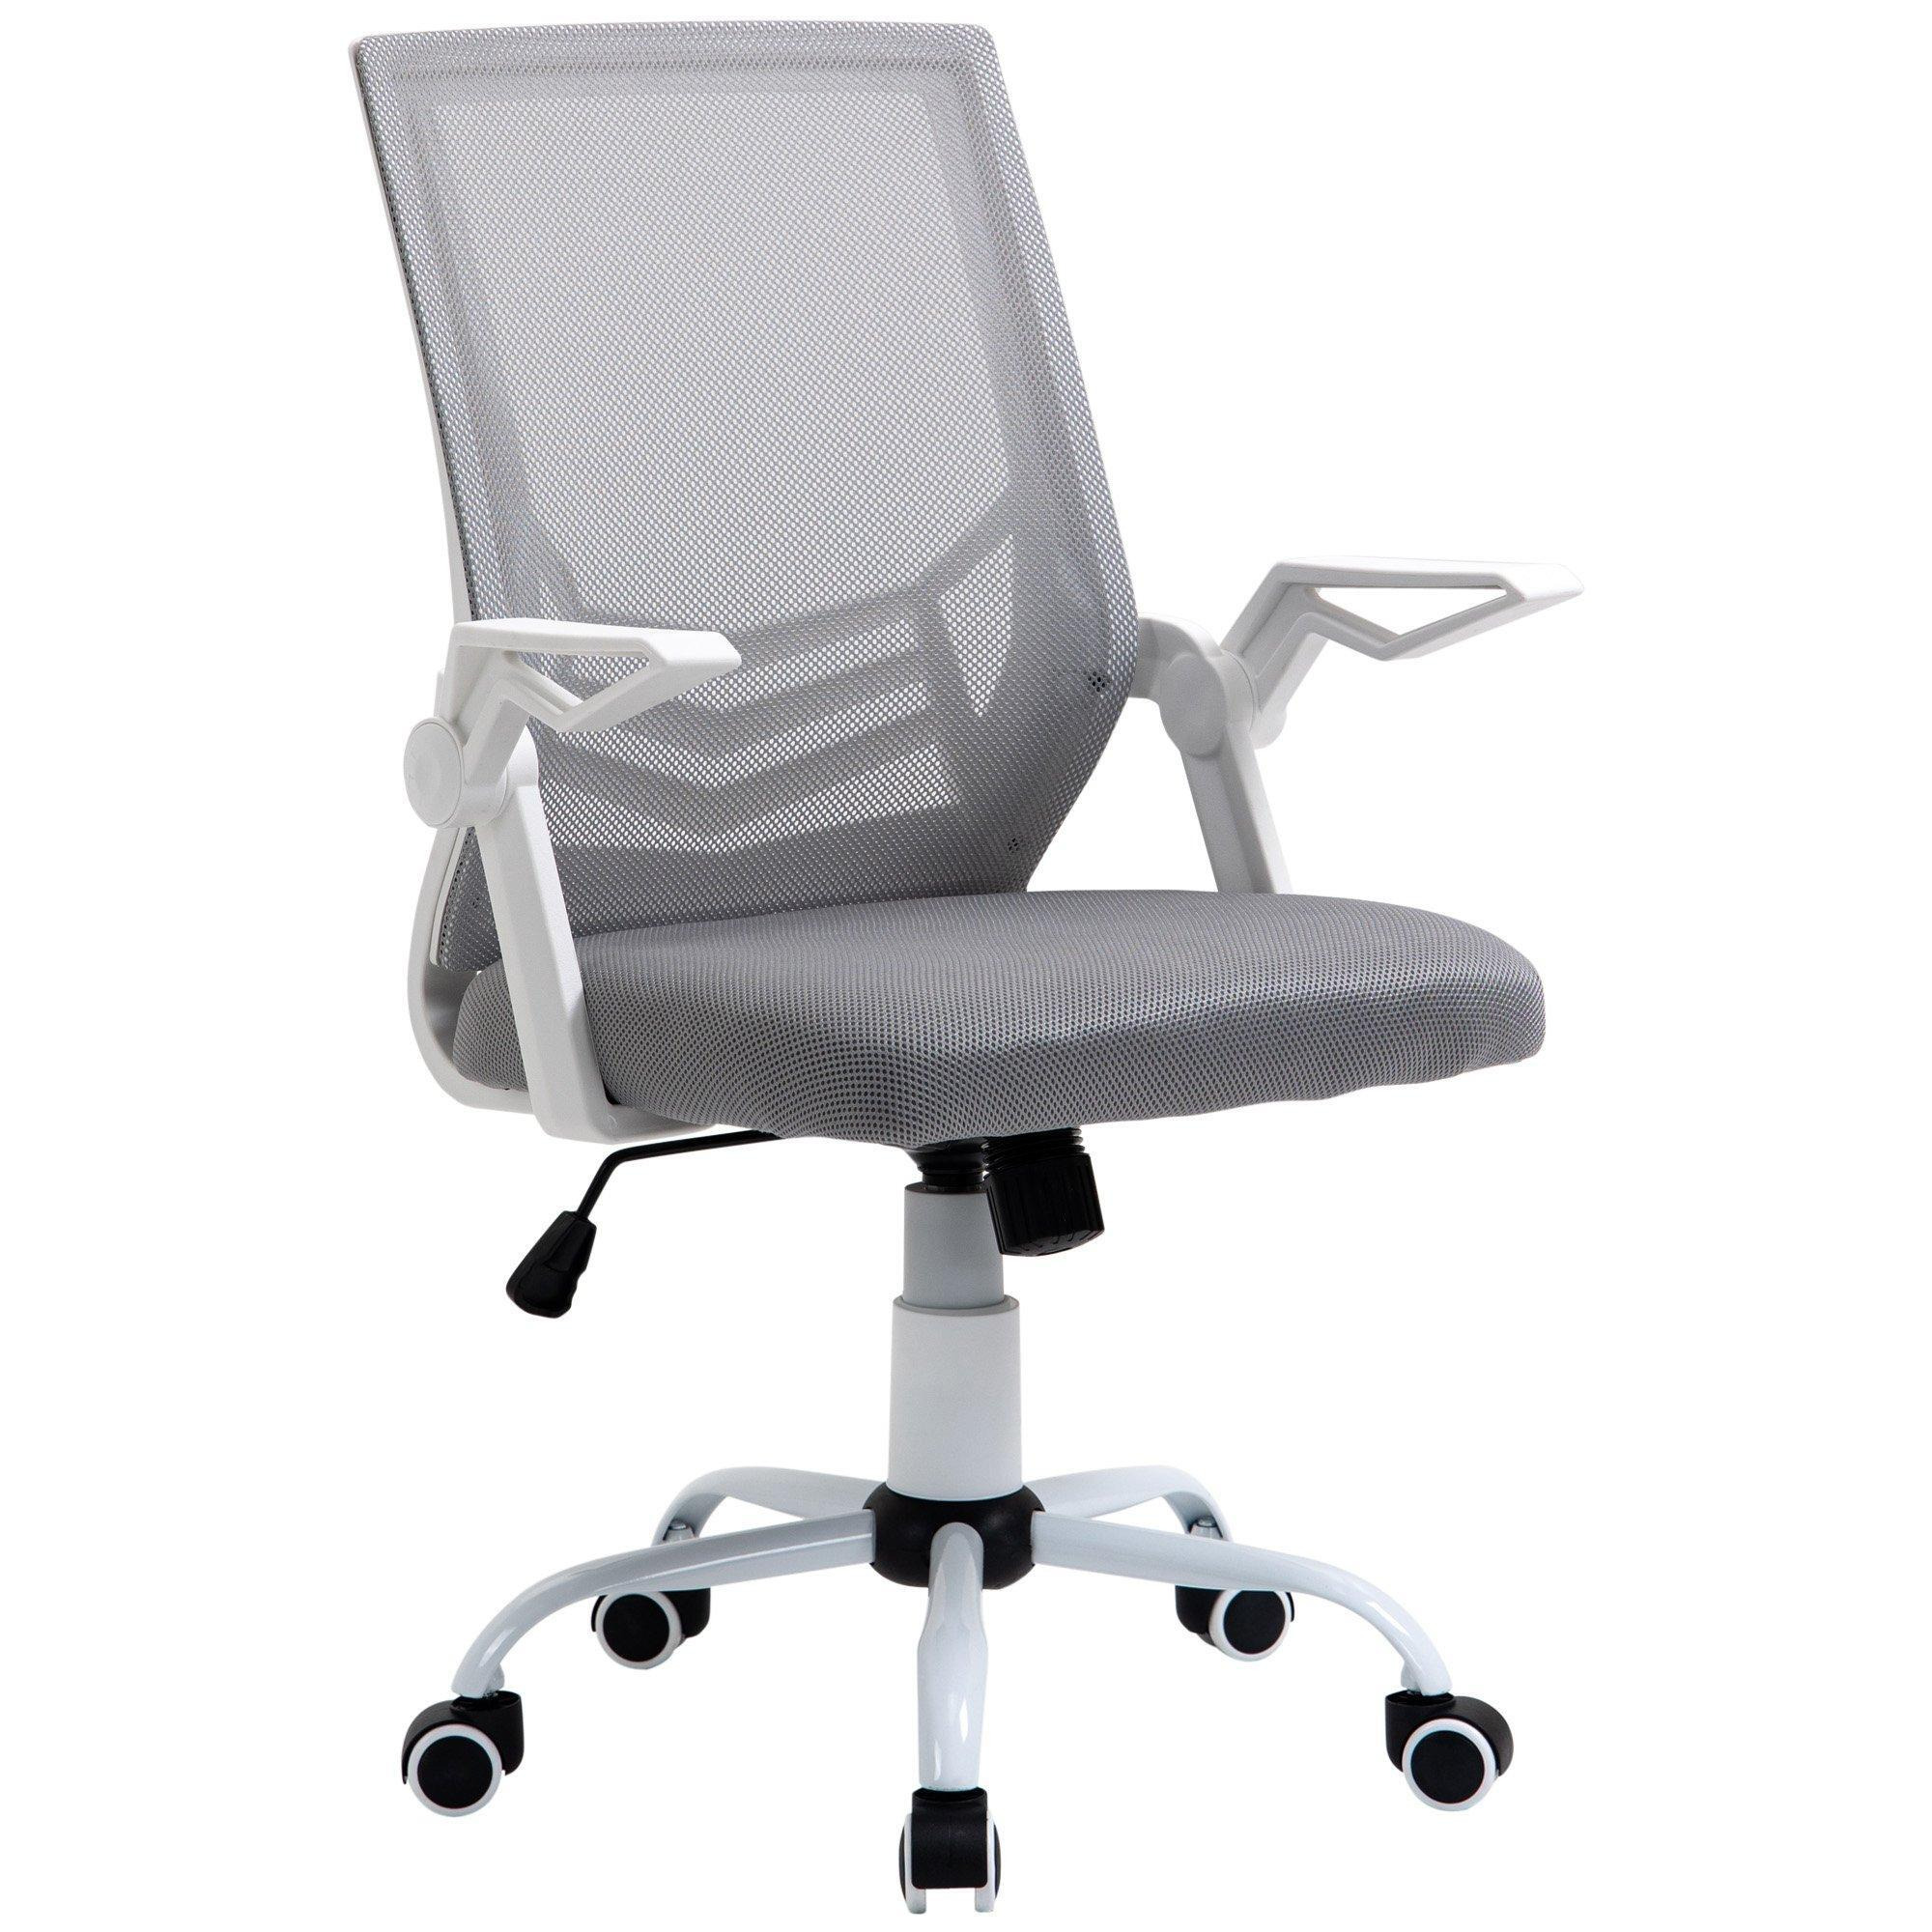 Mesh Home Office Chair Swivel Task Computer Desk Chair - image 1